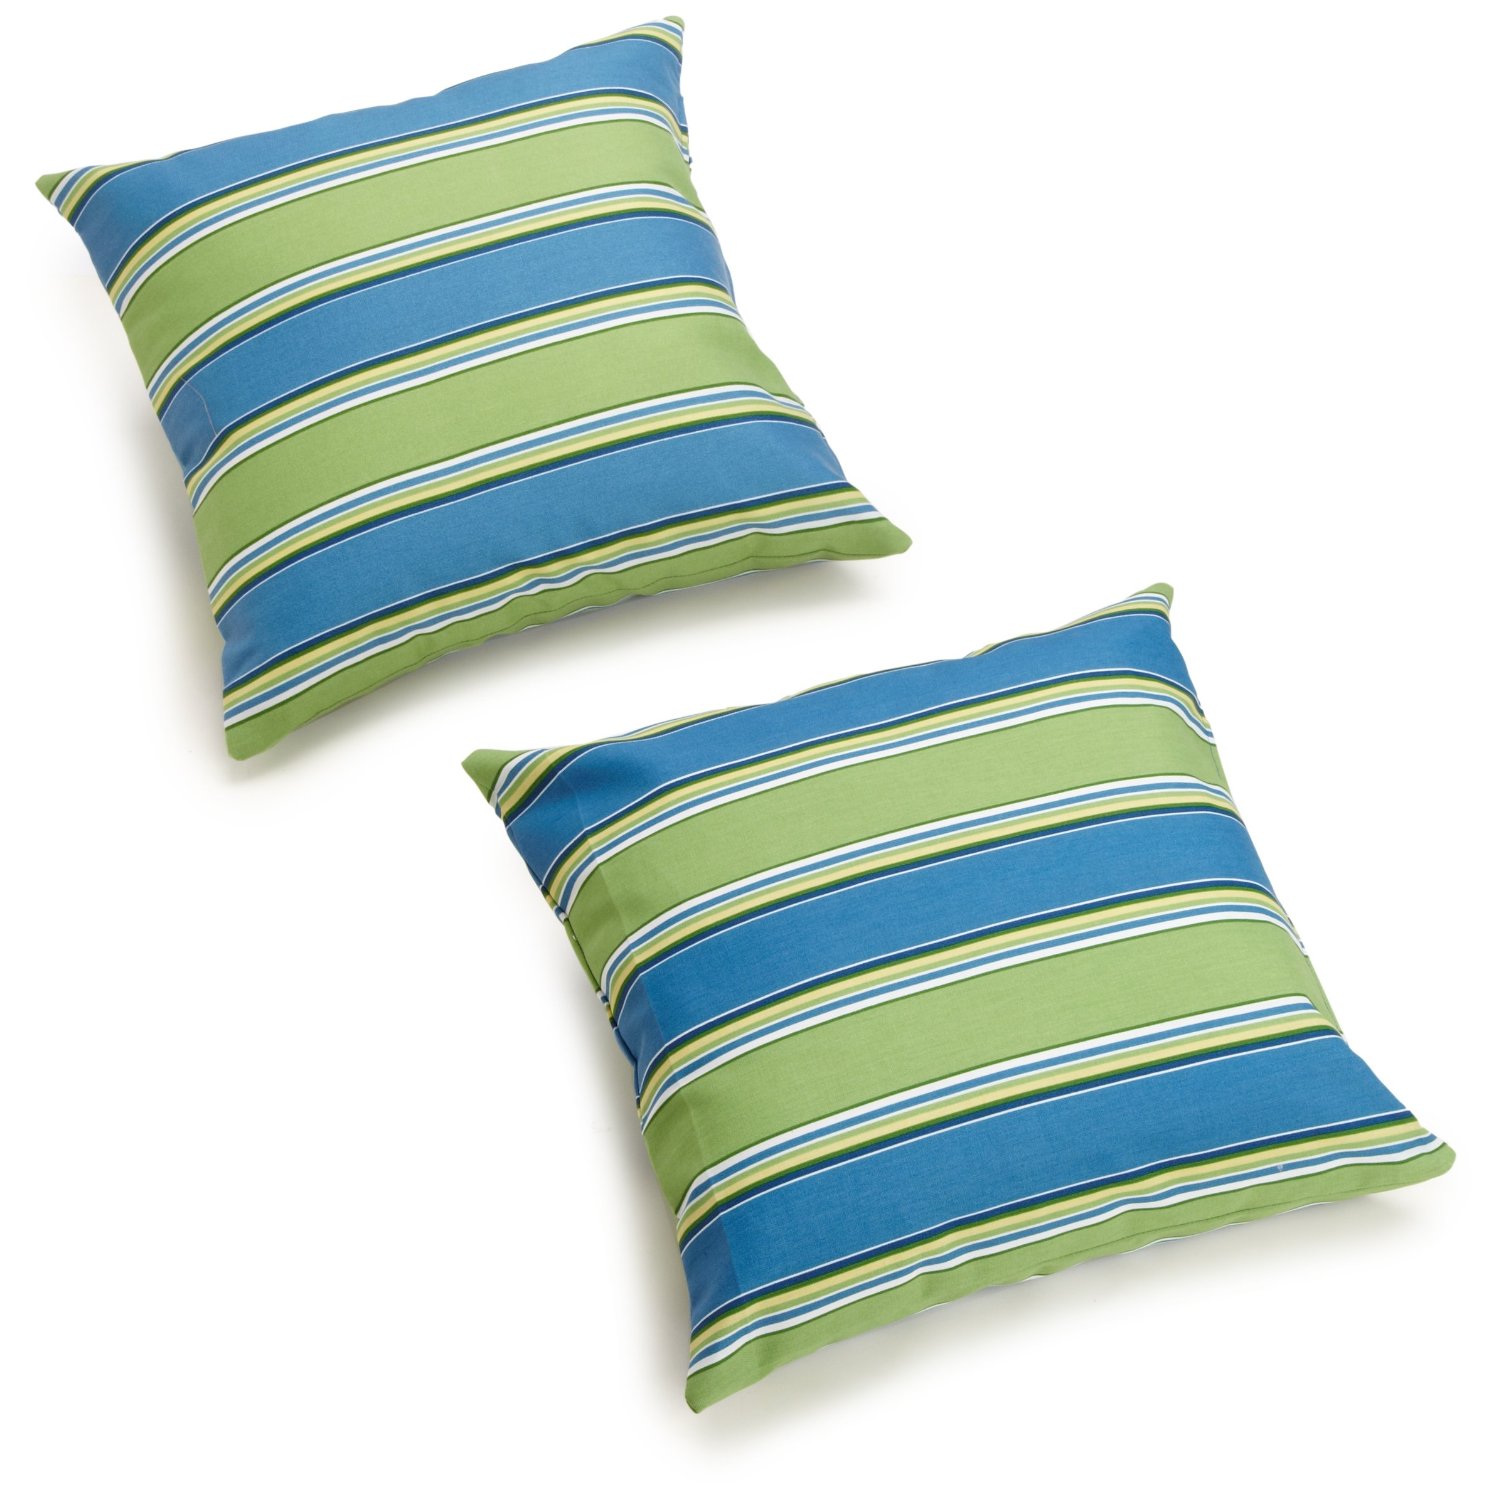 Aoodor Decorative Throw Pillow Set Of 4 - 18x18 Inch Square